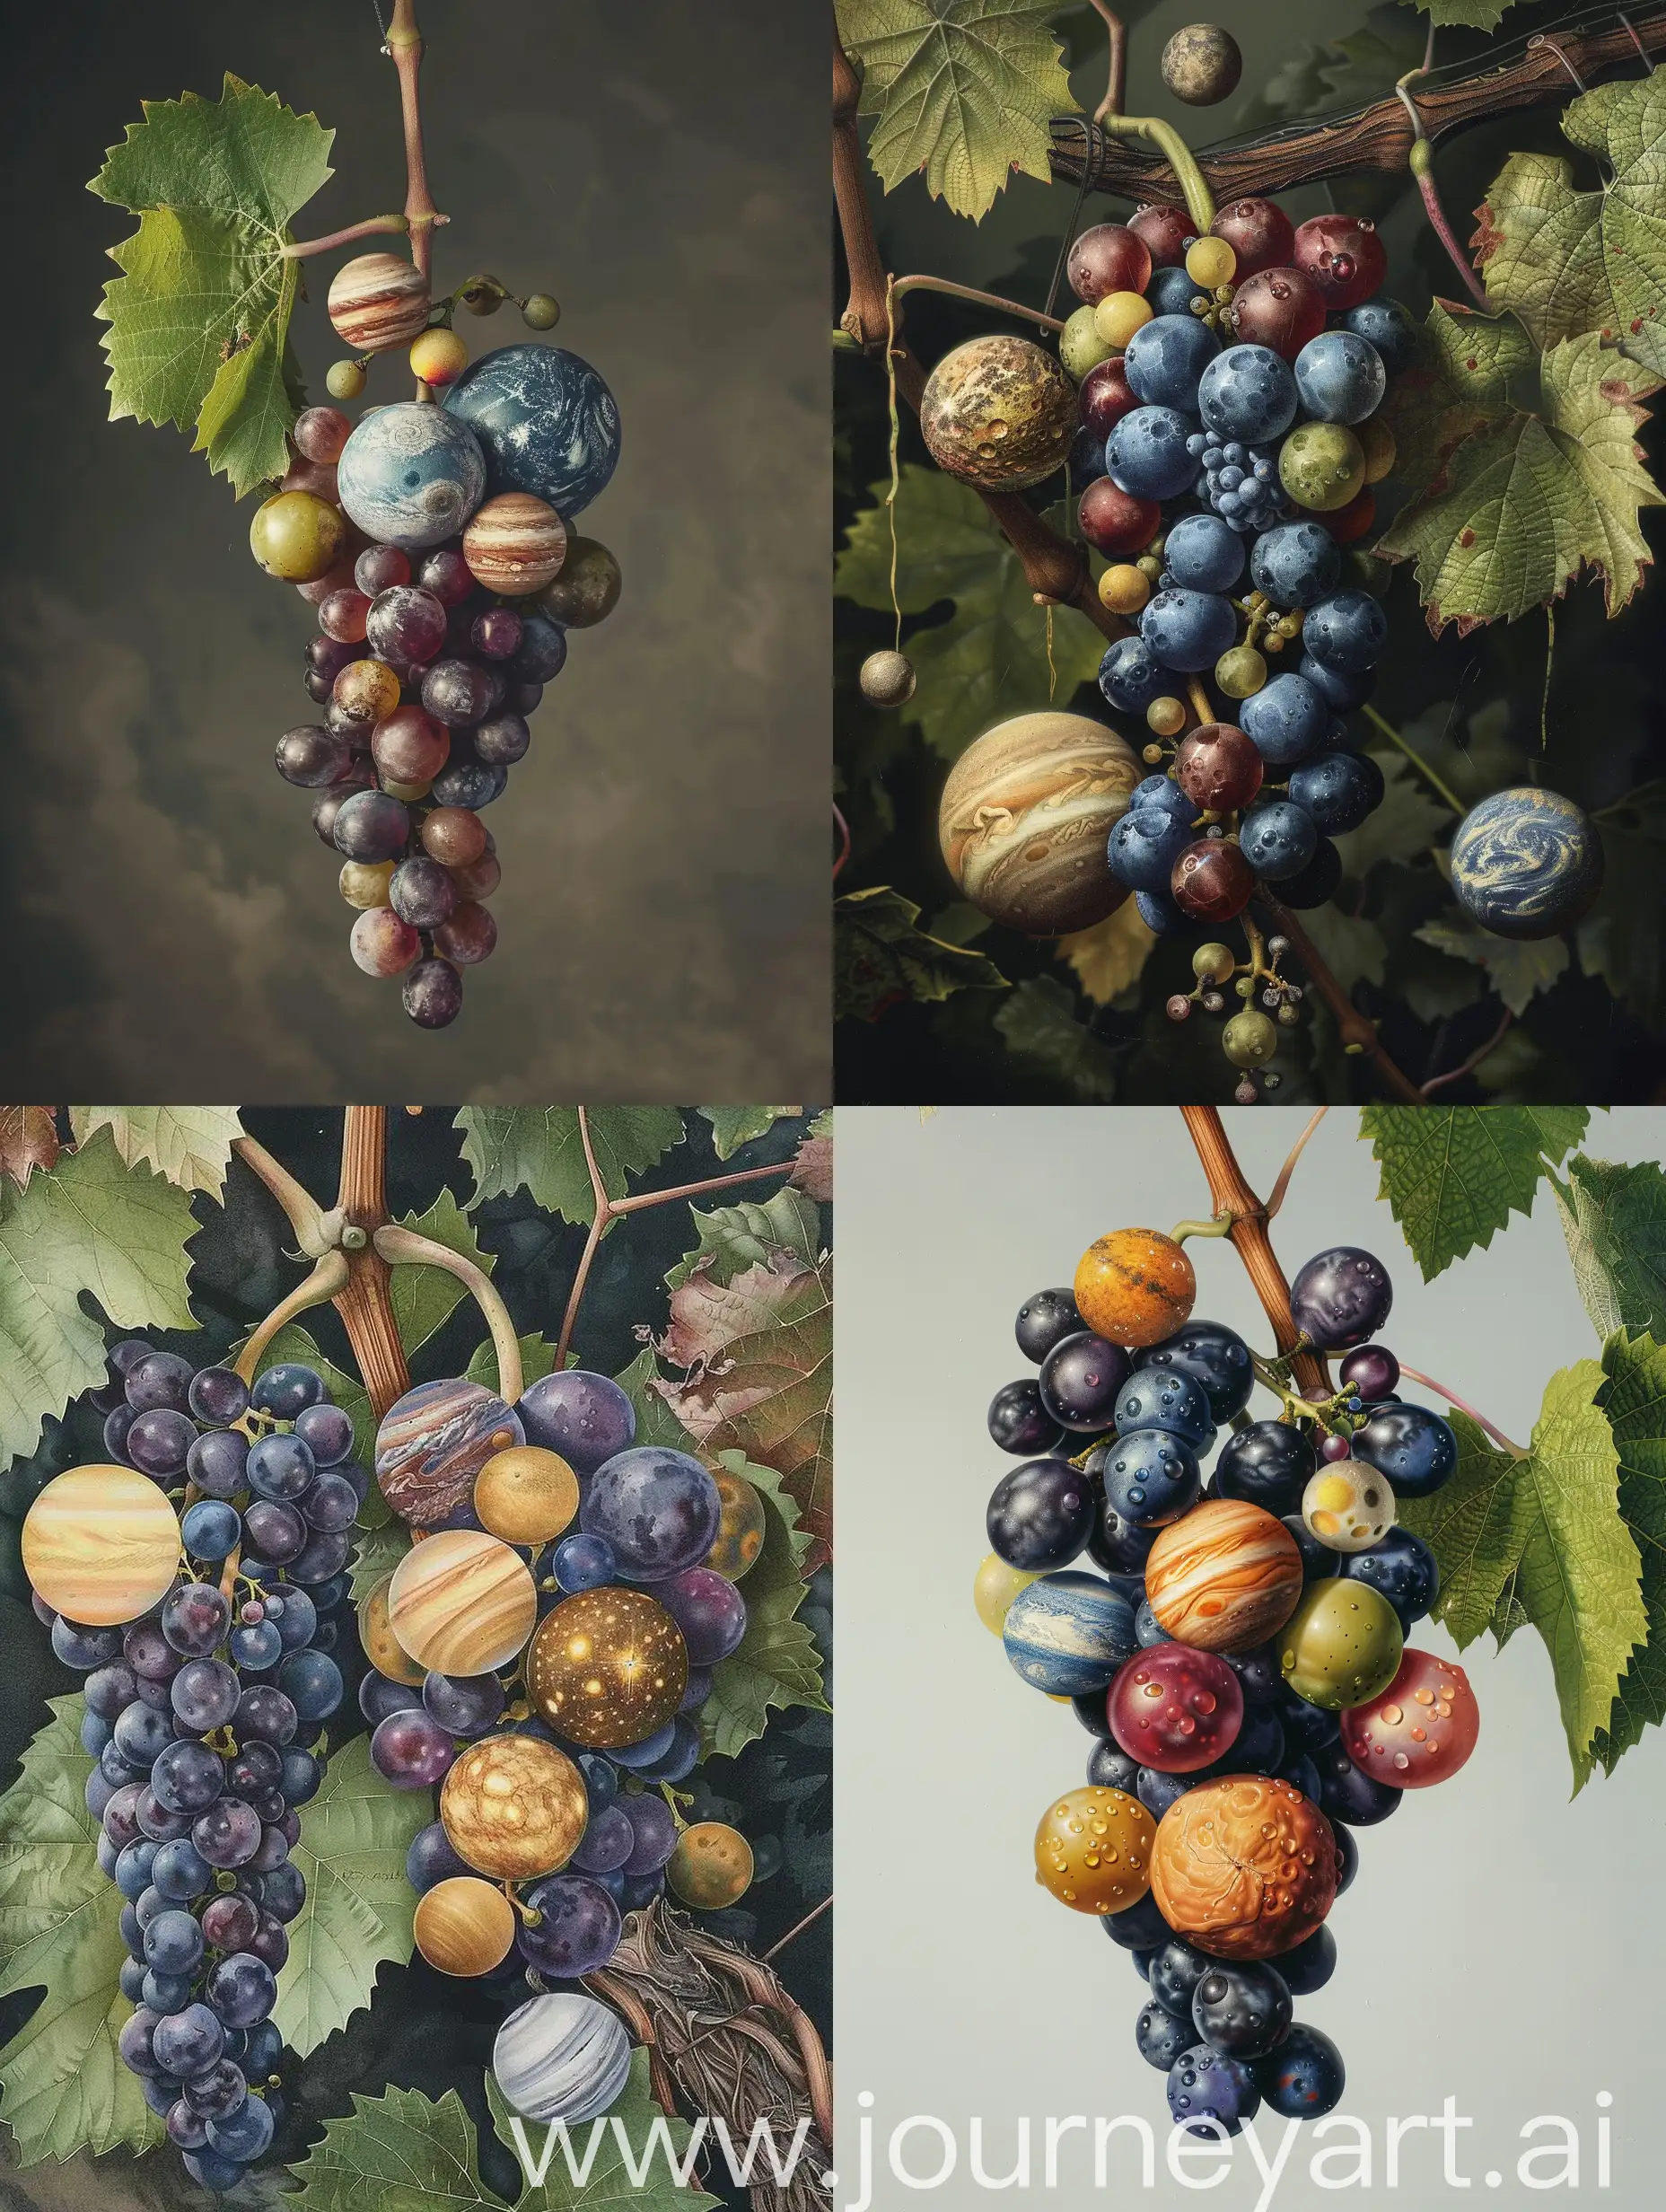 A bunch of grapes is hanging on the vine. The grapes are small planets of different varieties.